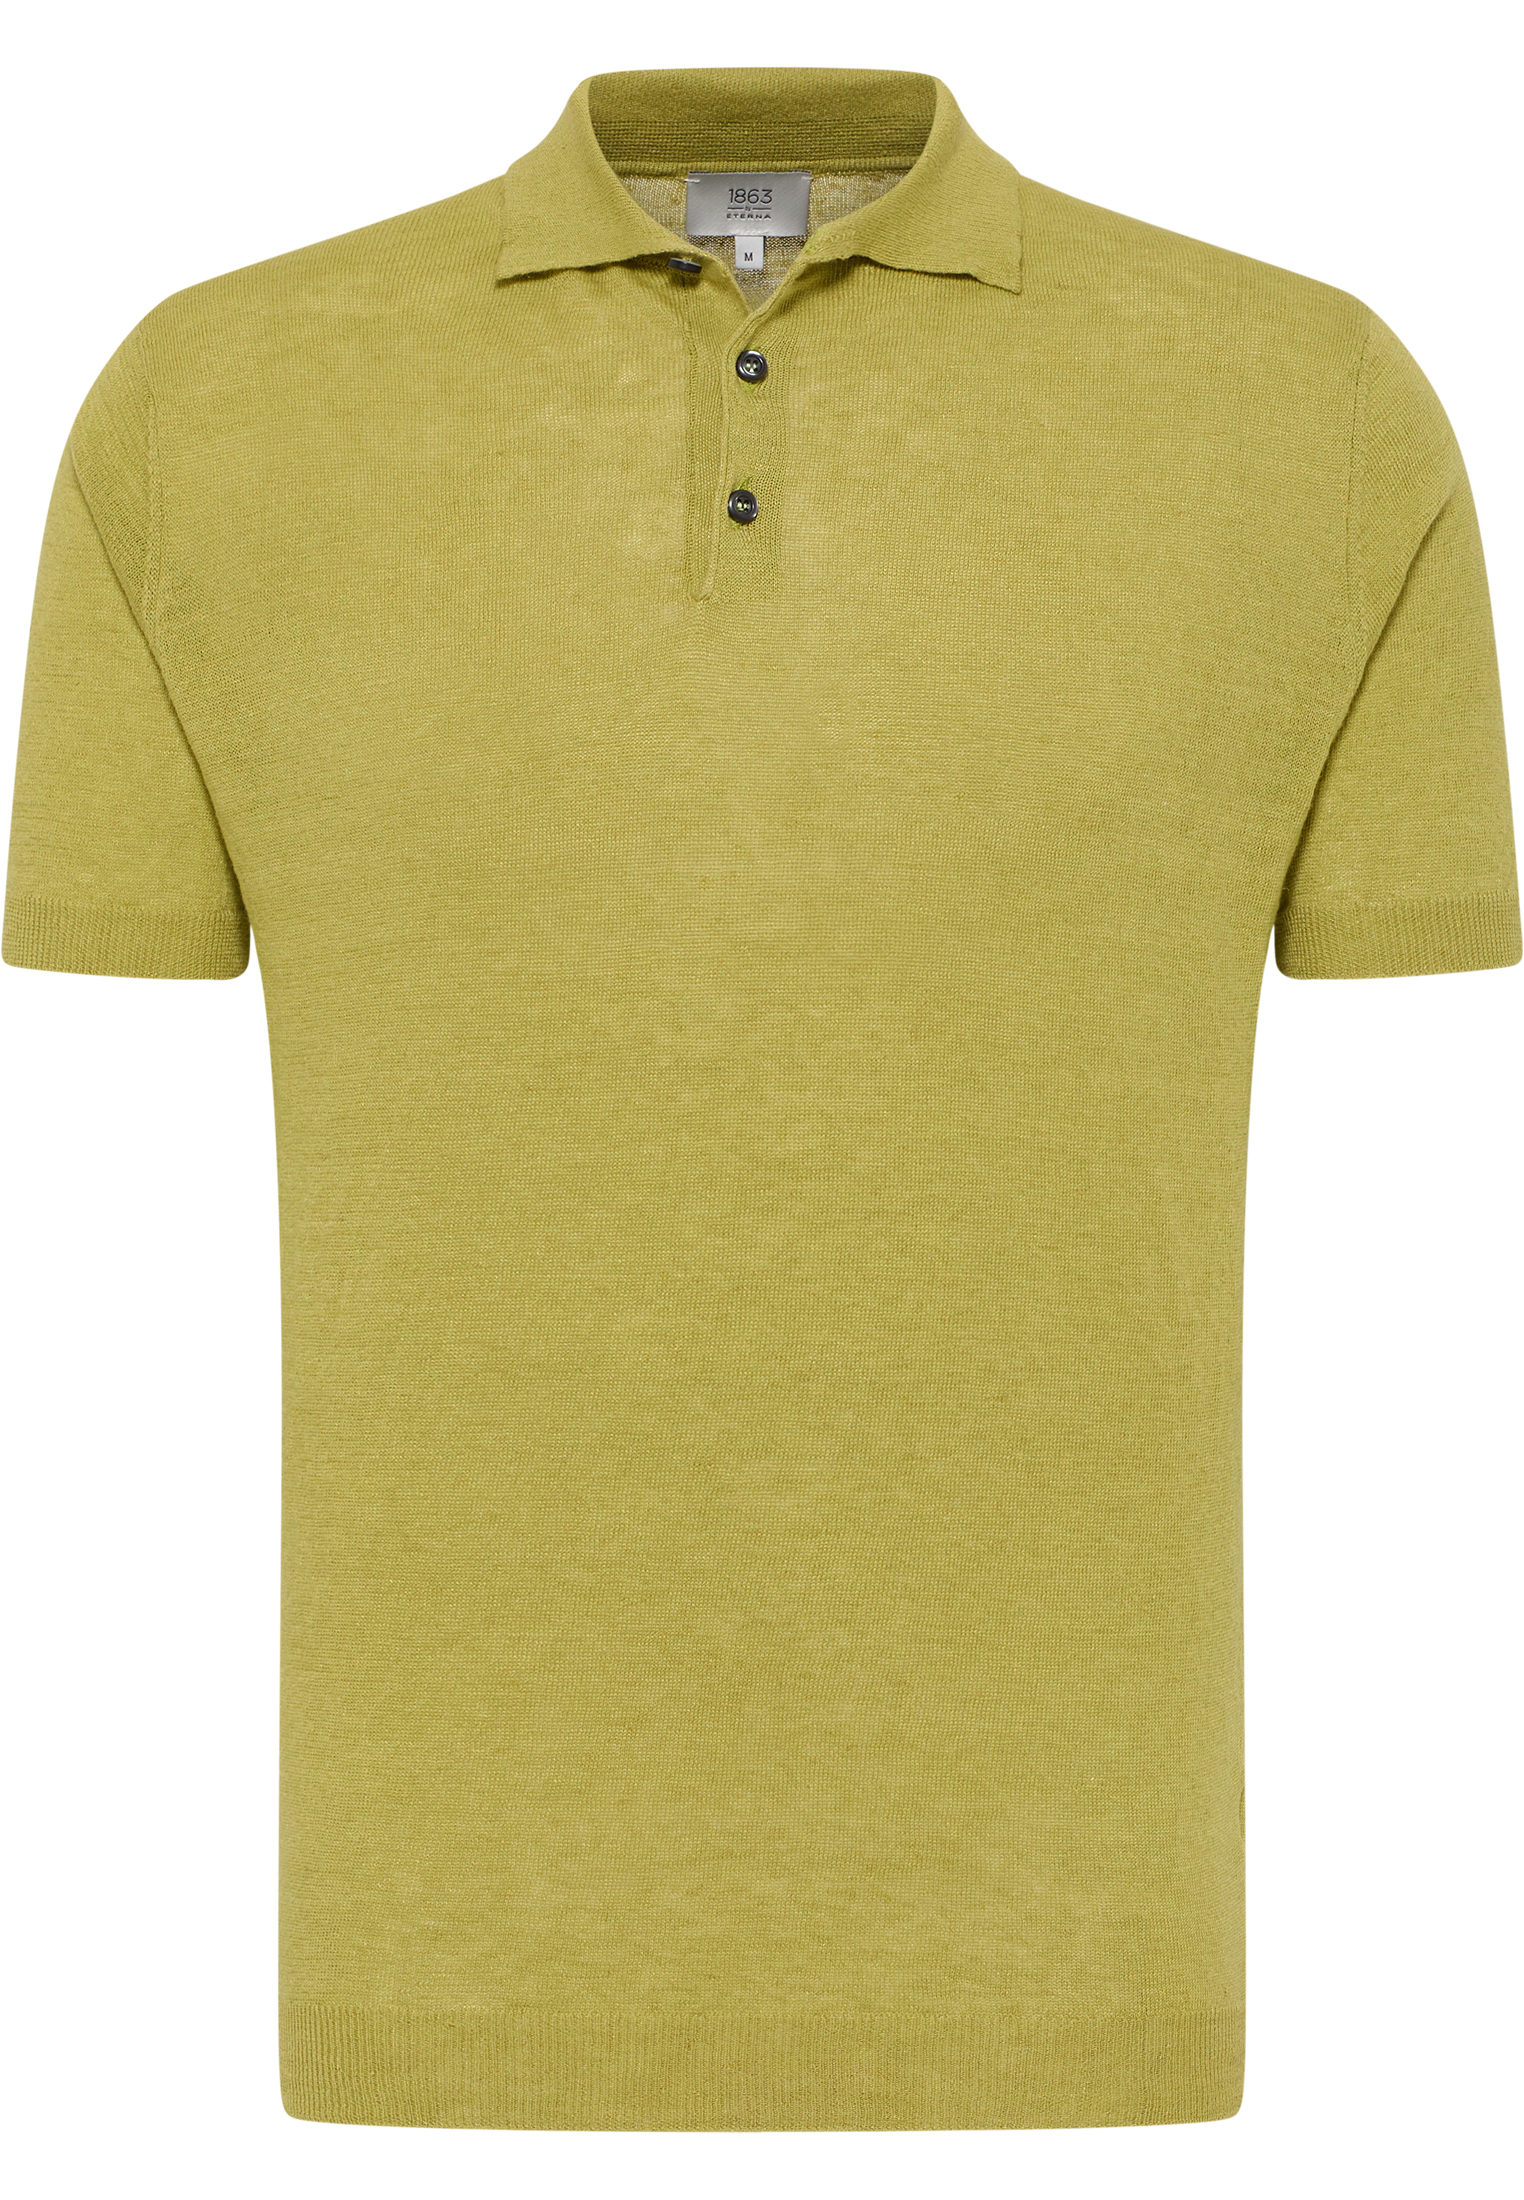 Knitted polo shirt in apple green plain